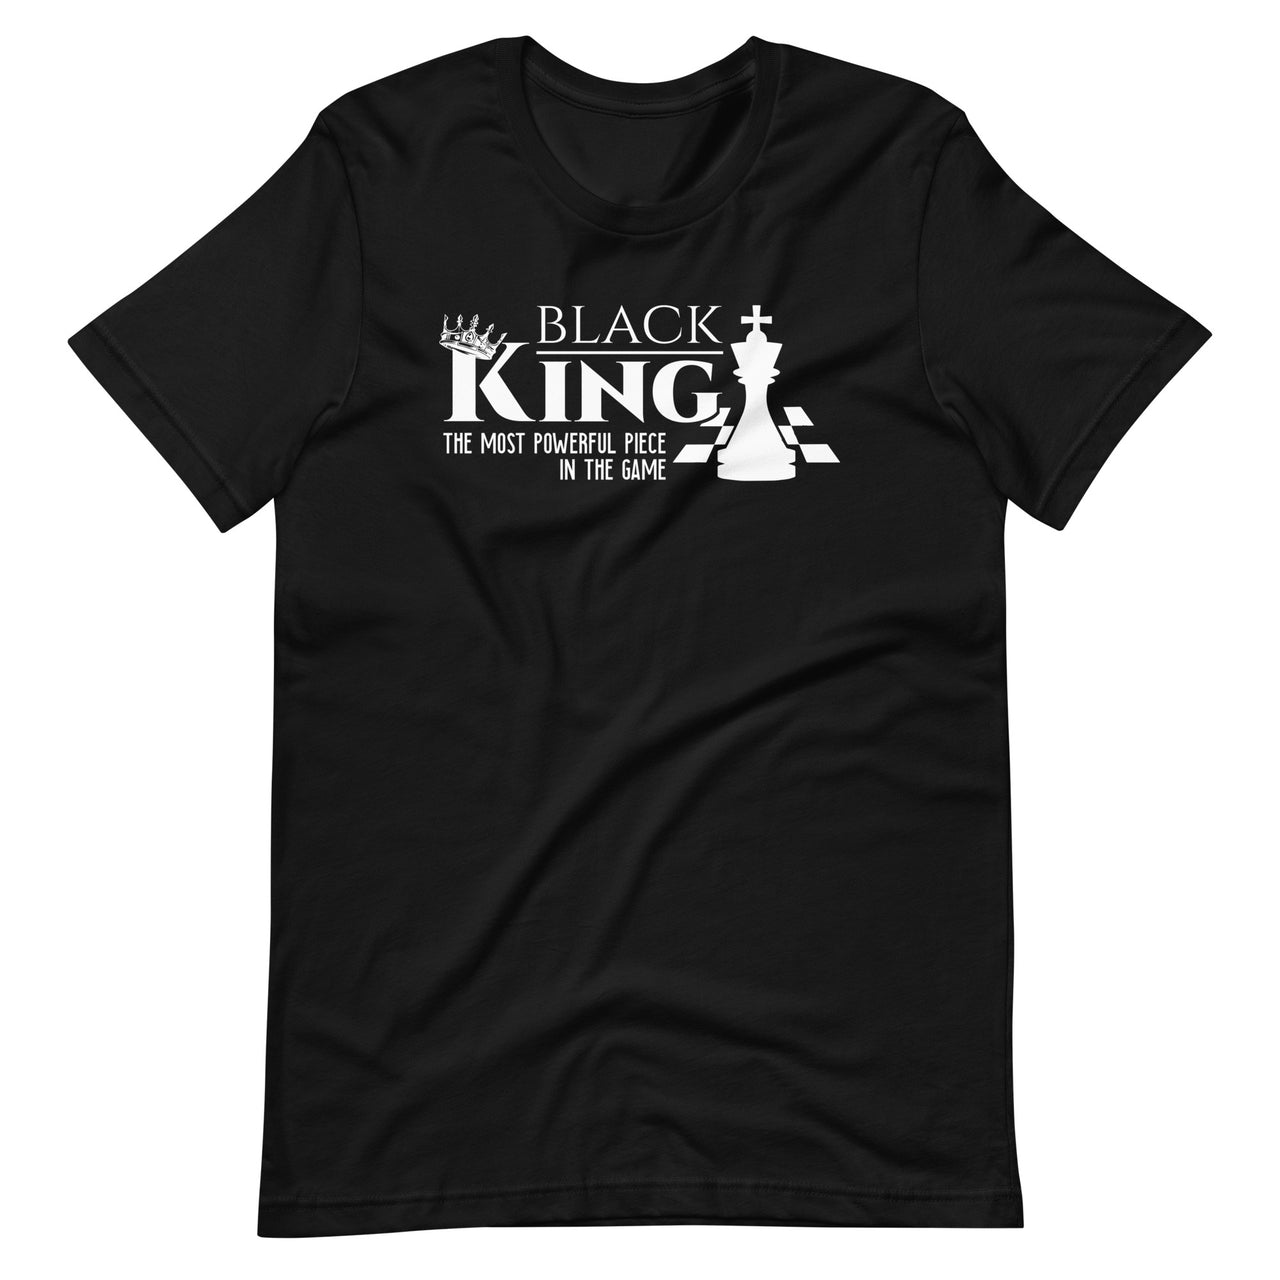 Black King - The Most Powerful Piece In The Game - Black History Unisex T-shirt